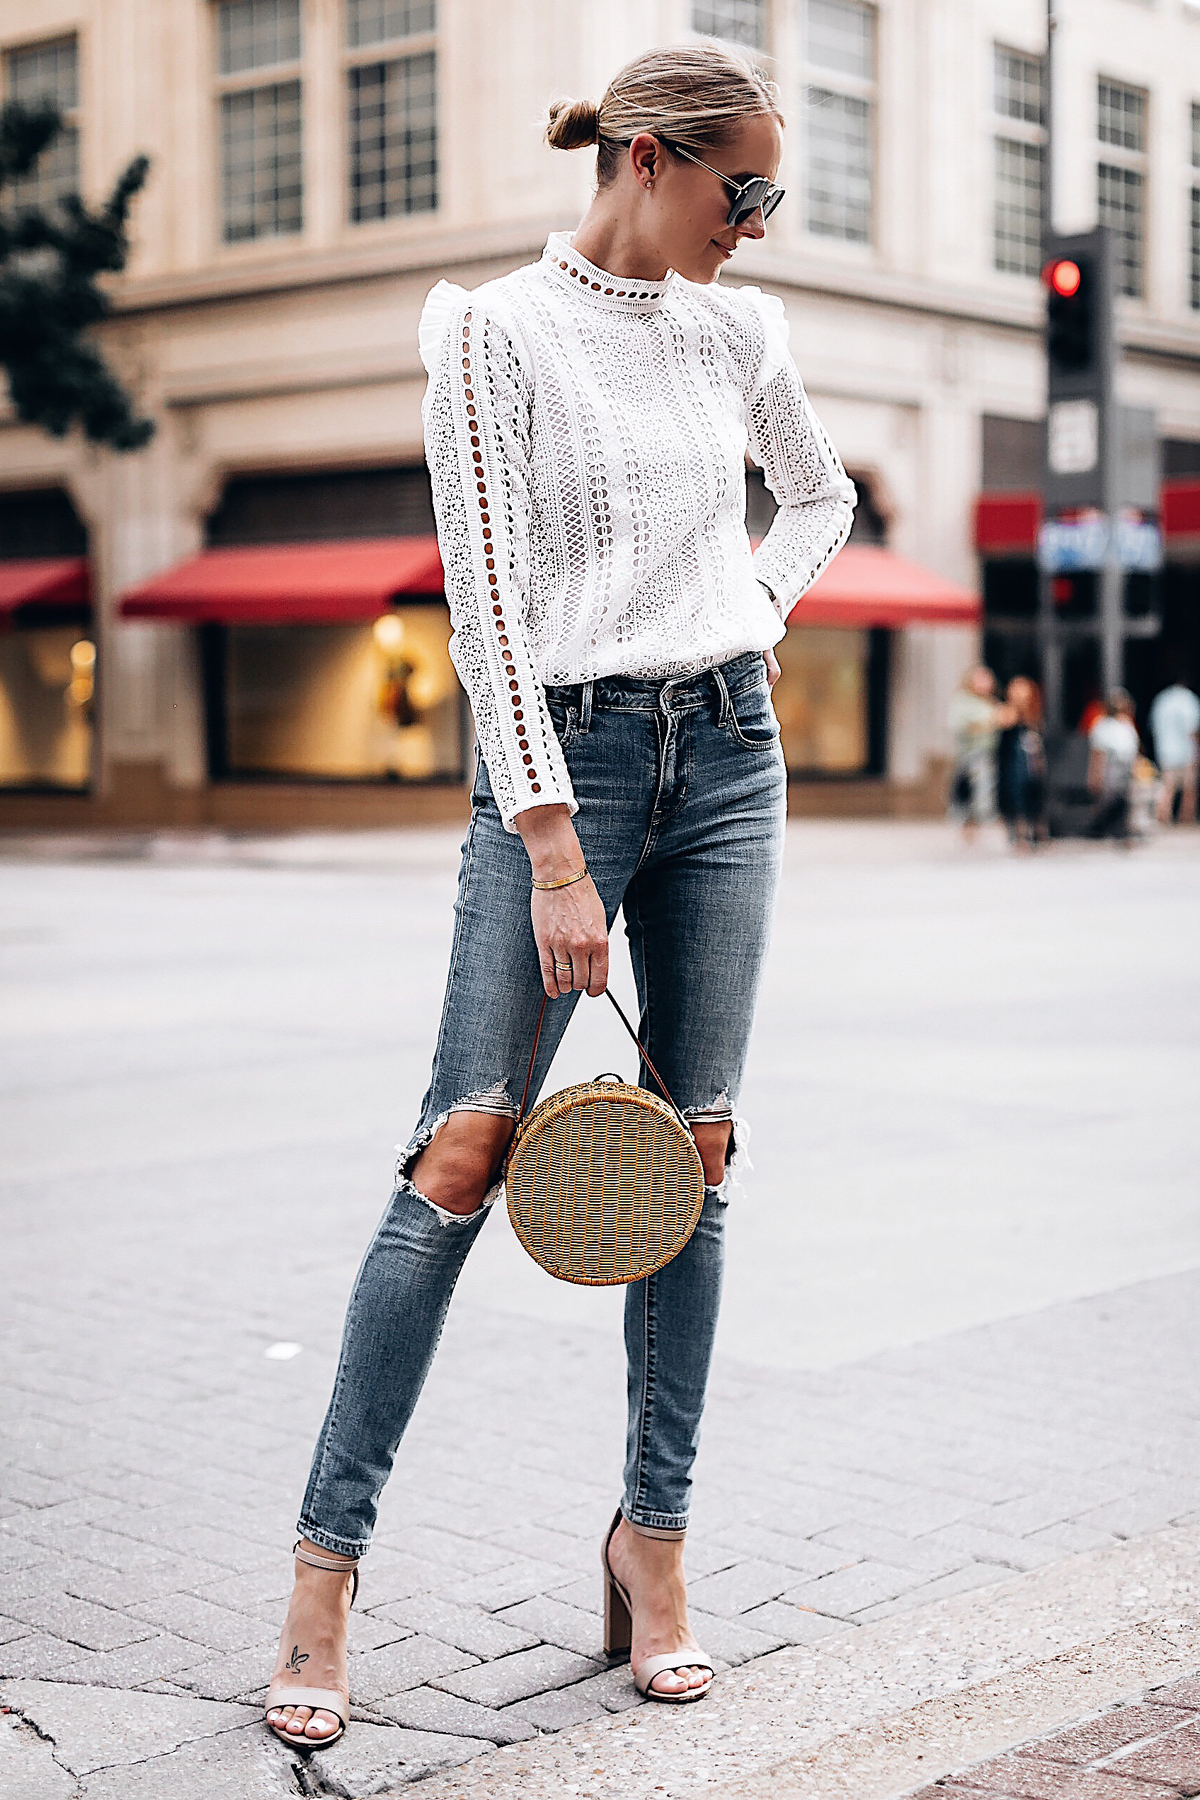 Blonde Woman Wearing Fashion Jackson Bloomingdales AQUA White Lace Ruffle Top Levis 721 Skinny Jeans Tan Ankle Strap Heeled Sandals Serpui Straw Circle Handbag Fashion Jackson San Diego Fashion Blogger Street Style